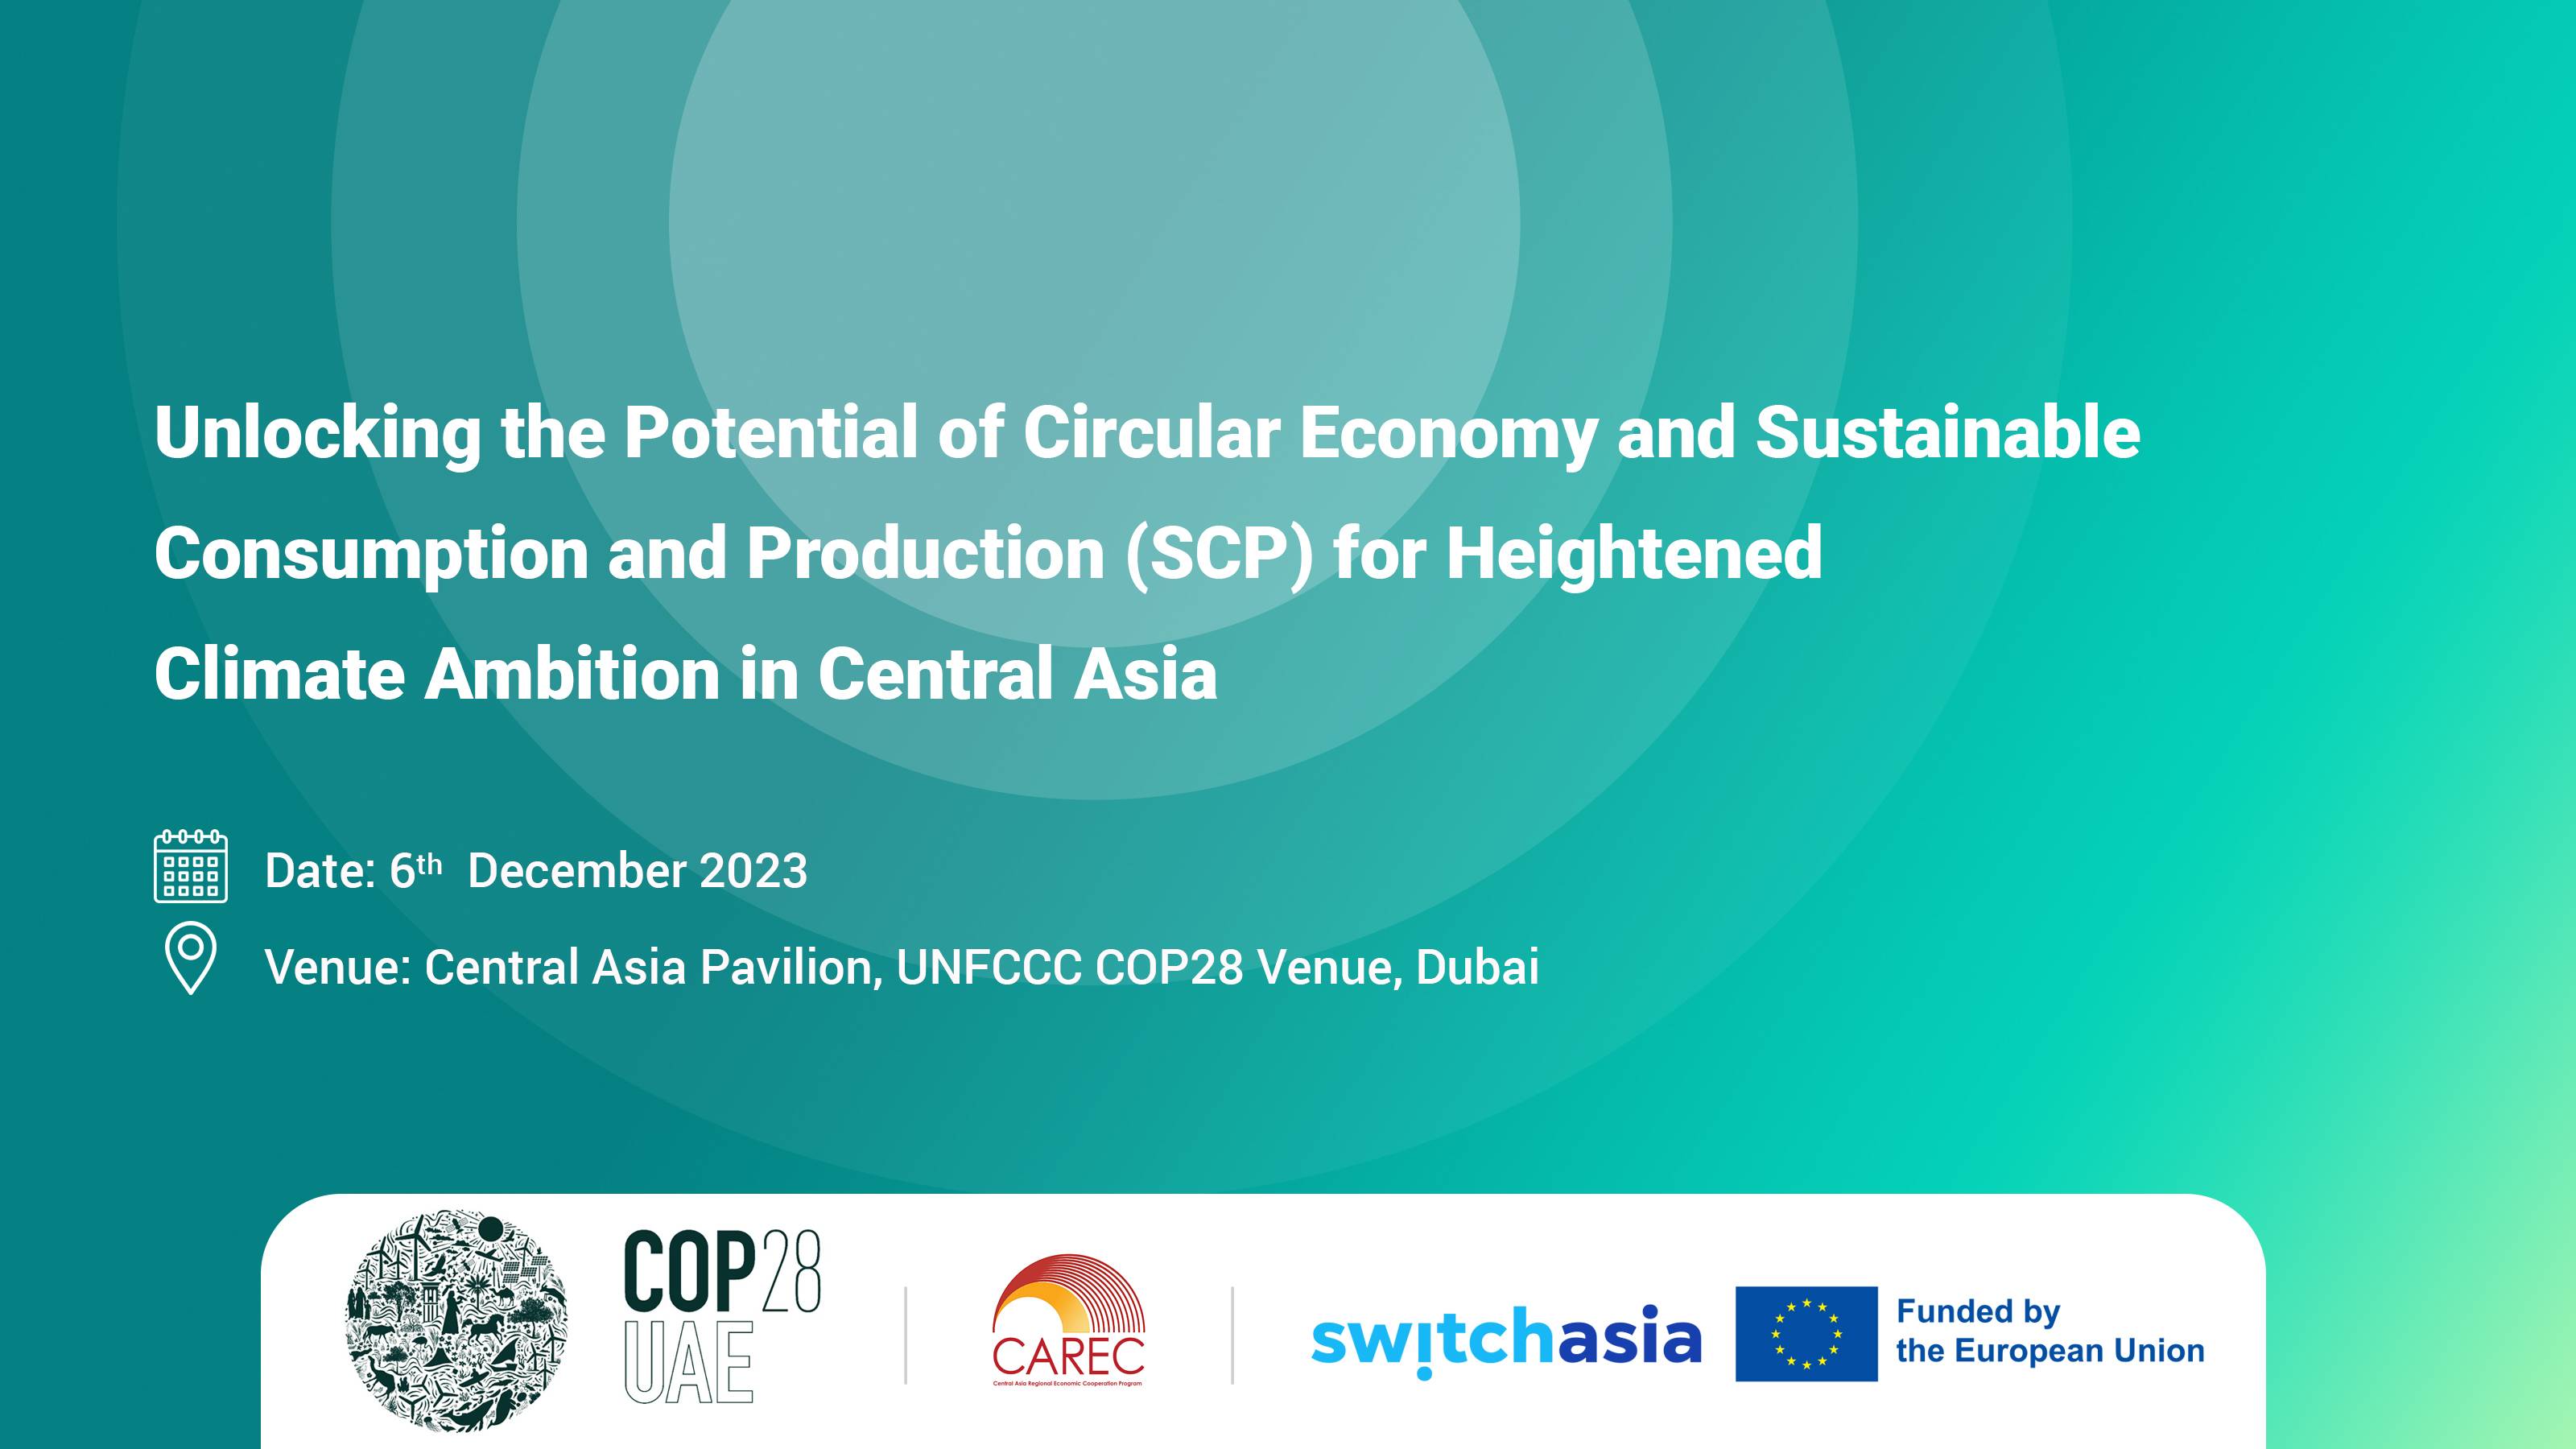 COP28: Unlocking the Potential of Circular Economy and Sustainable Consumption and Production (SCP) for Heightened Climate Ambition in Central Asia